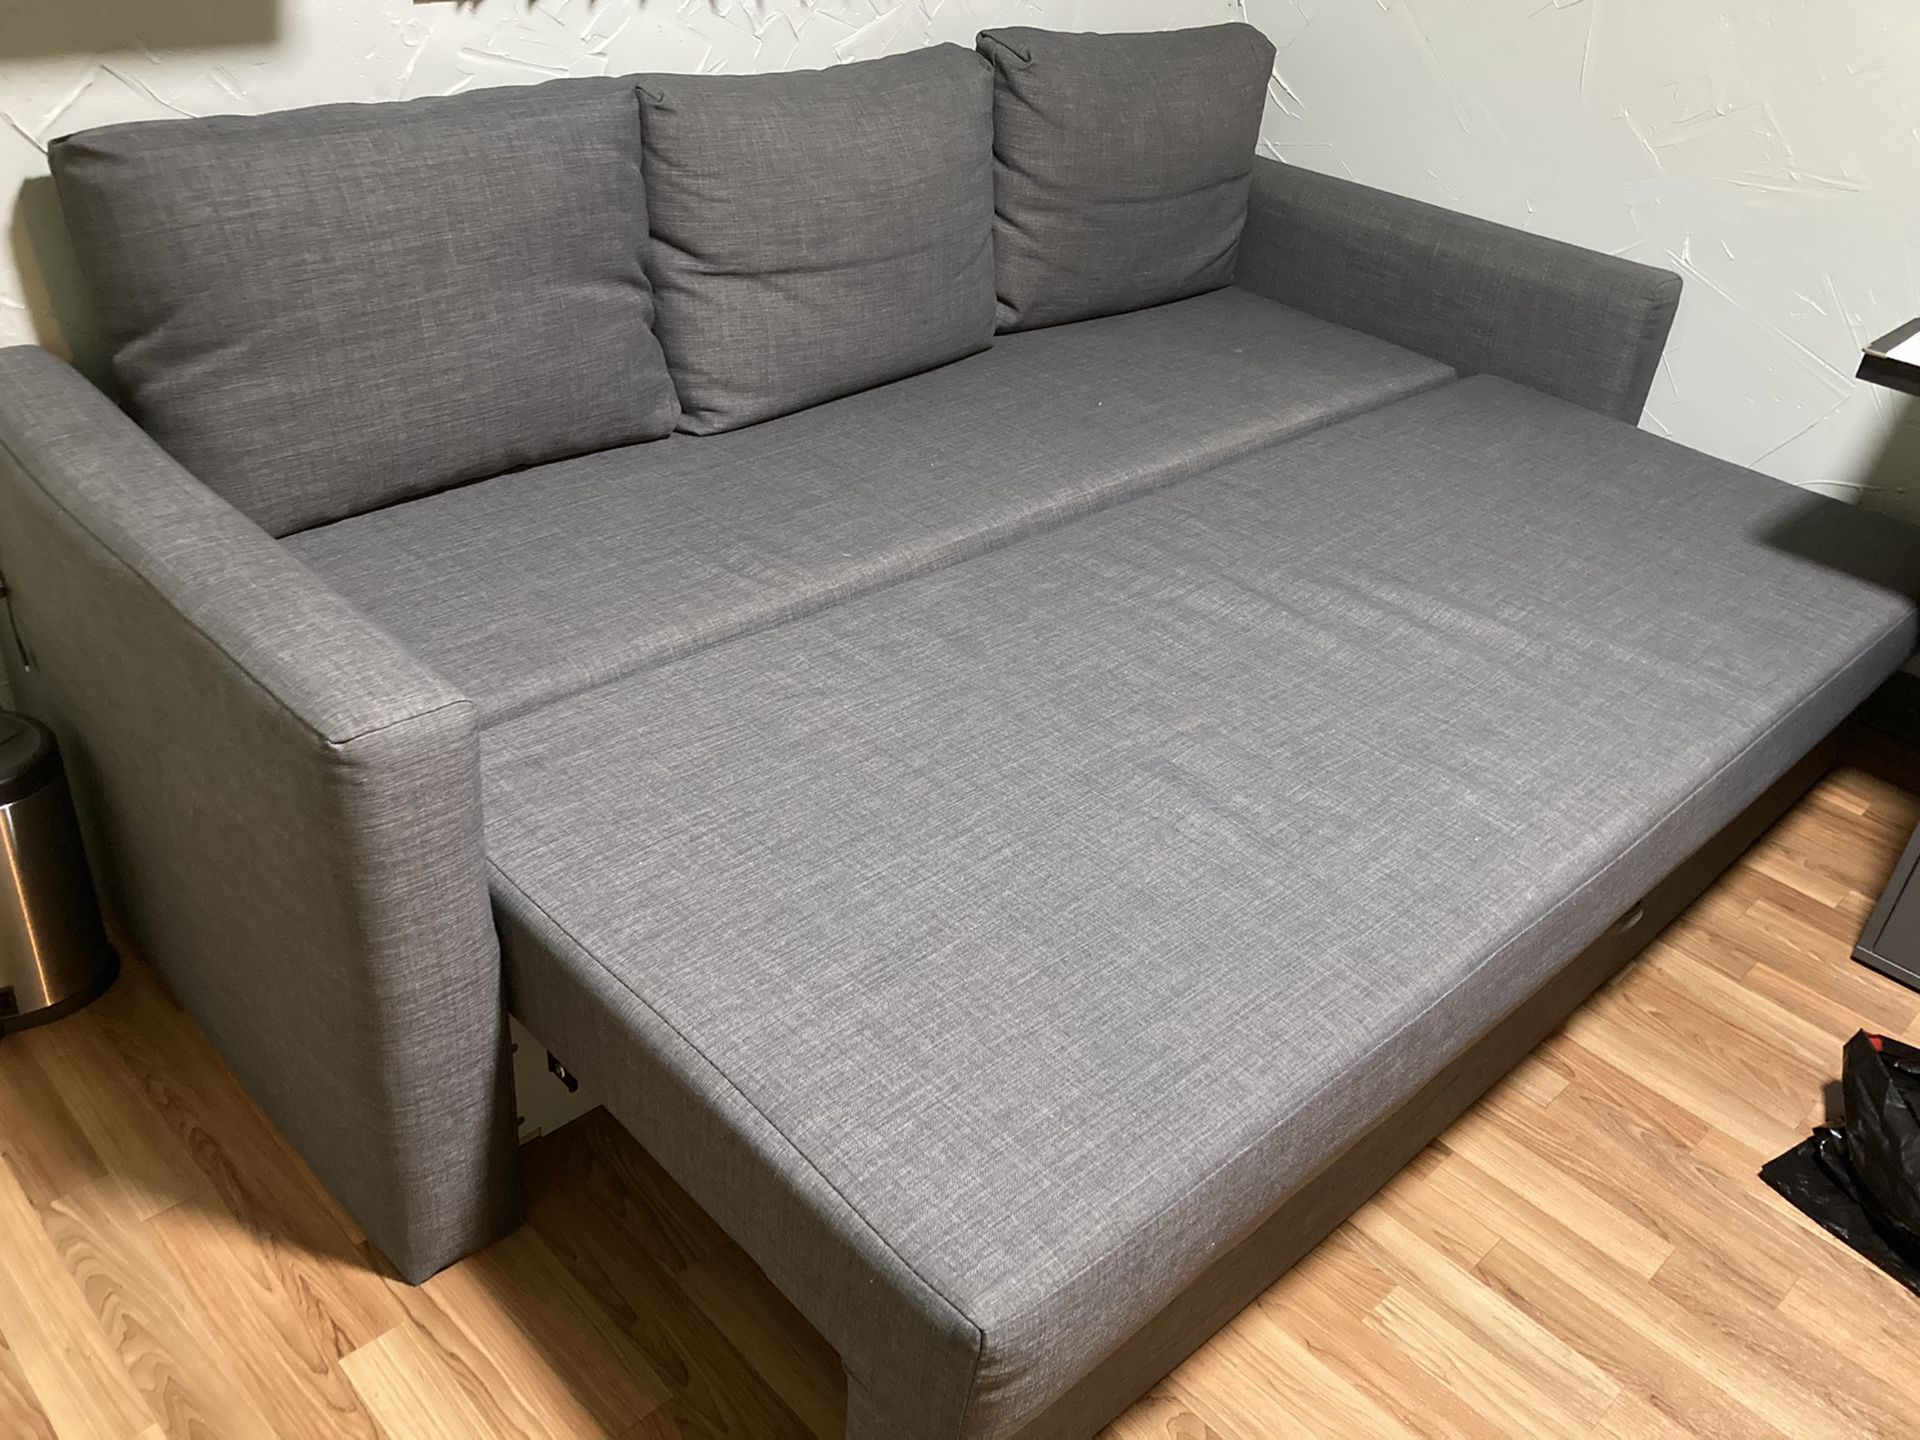 Ikea Sofabed (sofa + bed)